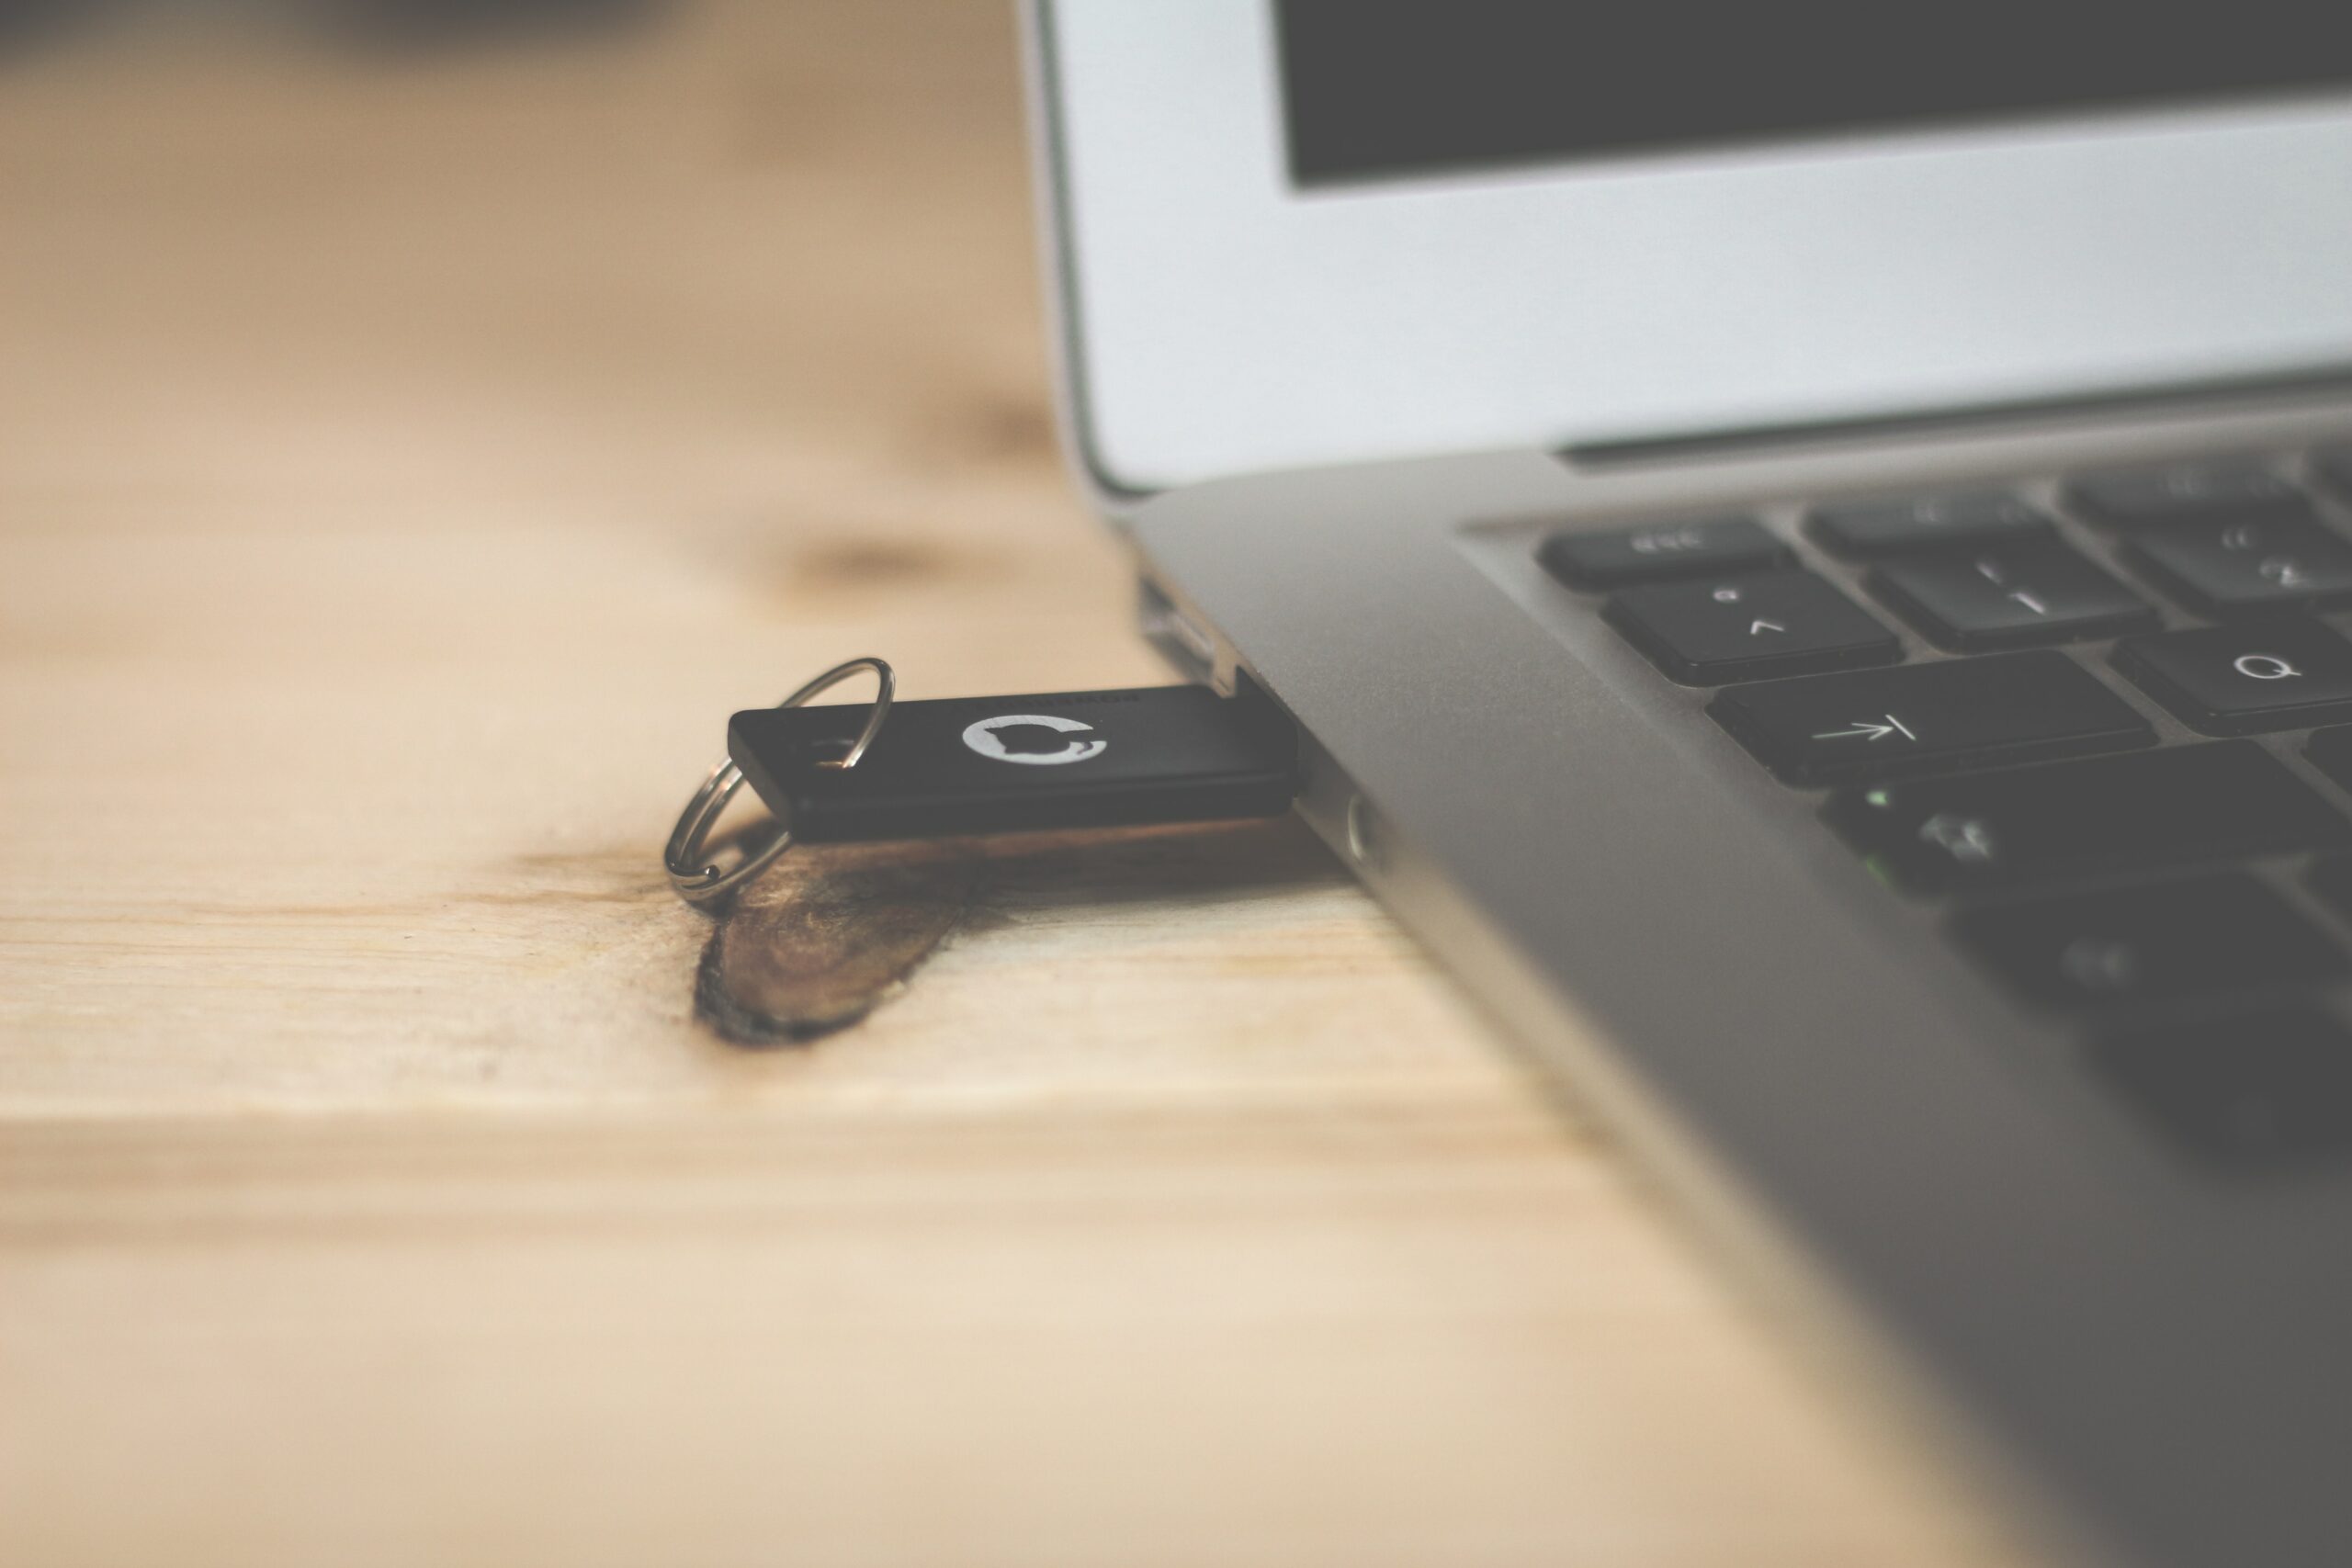 Do you really need to properly eject a USB drive before yanking it out?